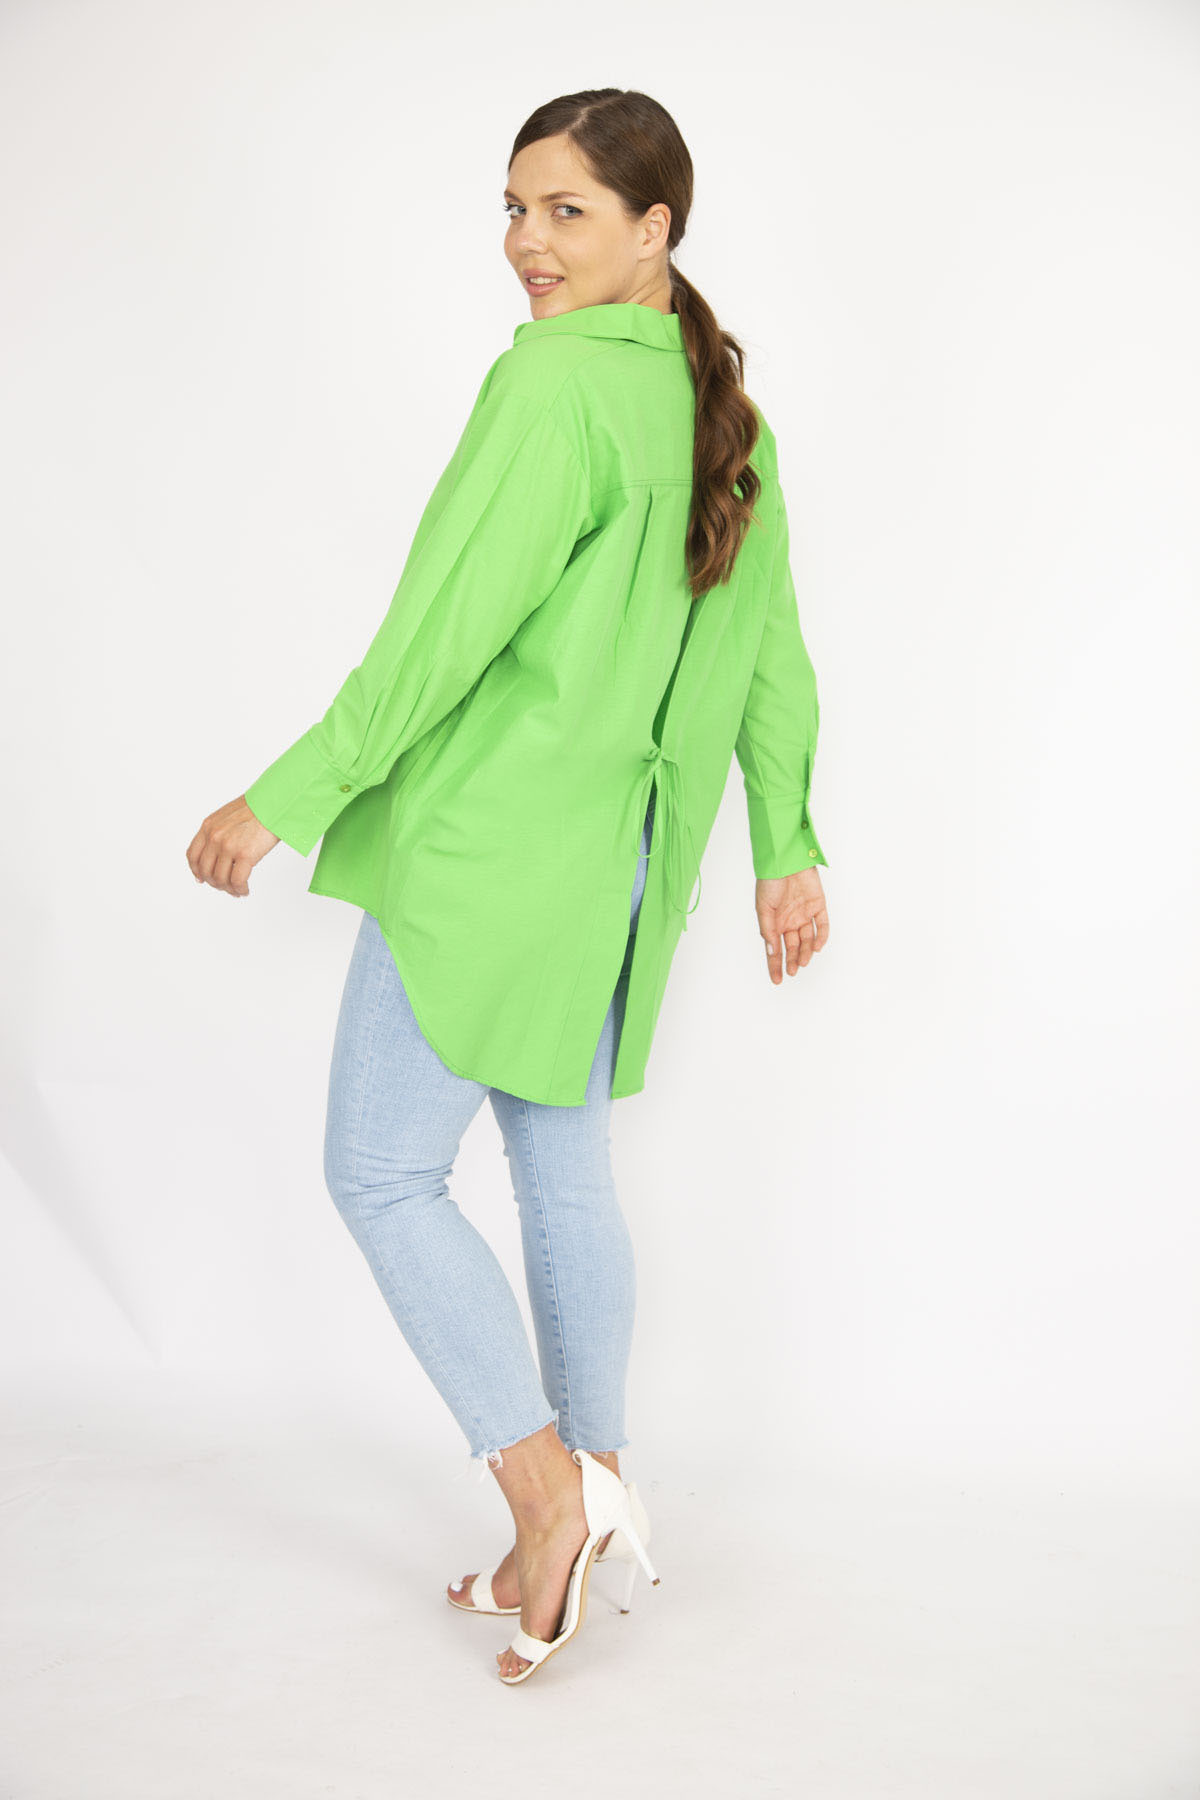 Şans Women's Plus Size Green Shirt with a slit in the back and laces and buttoned front buttons